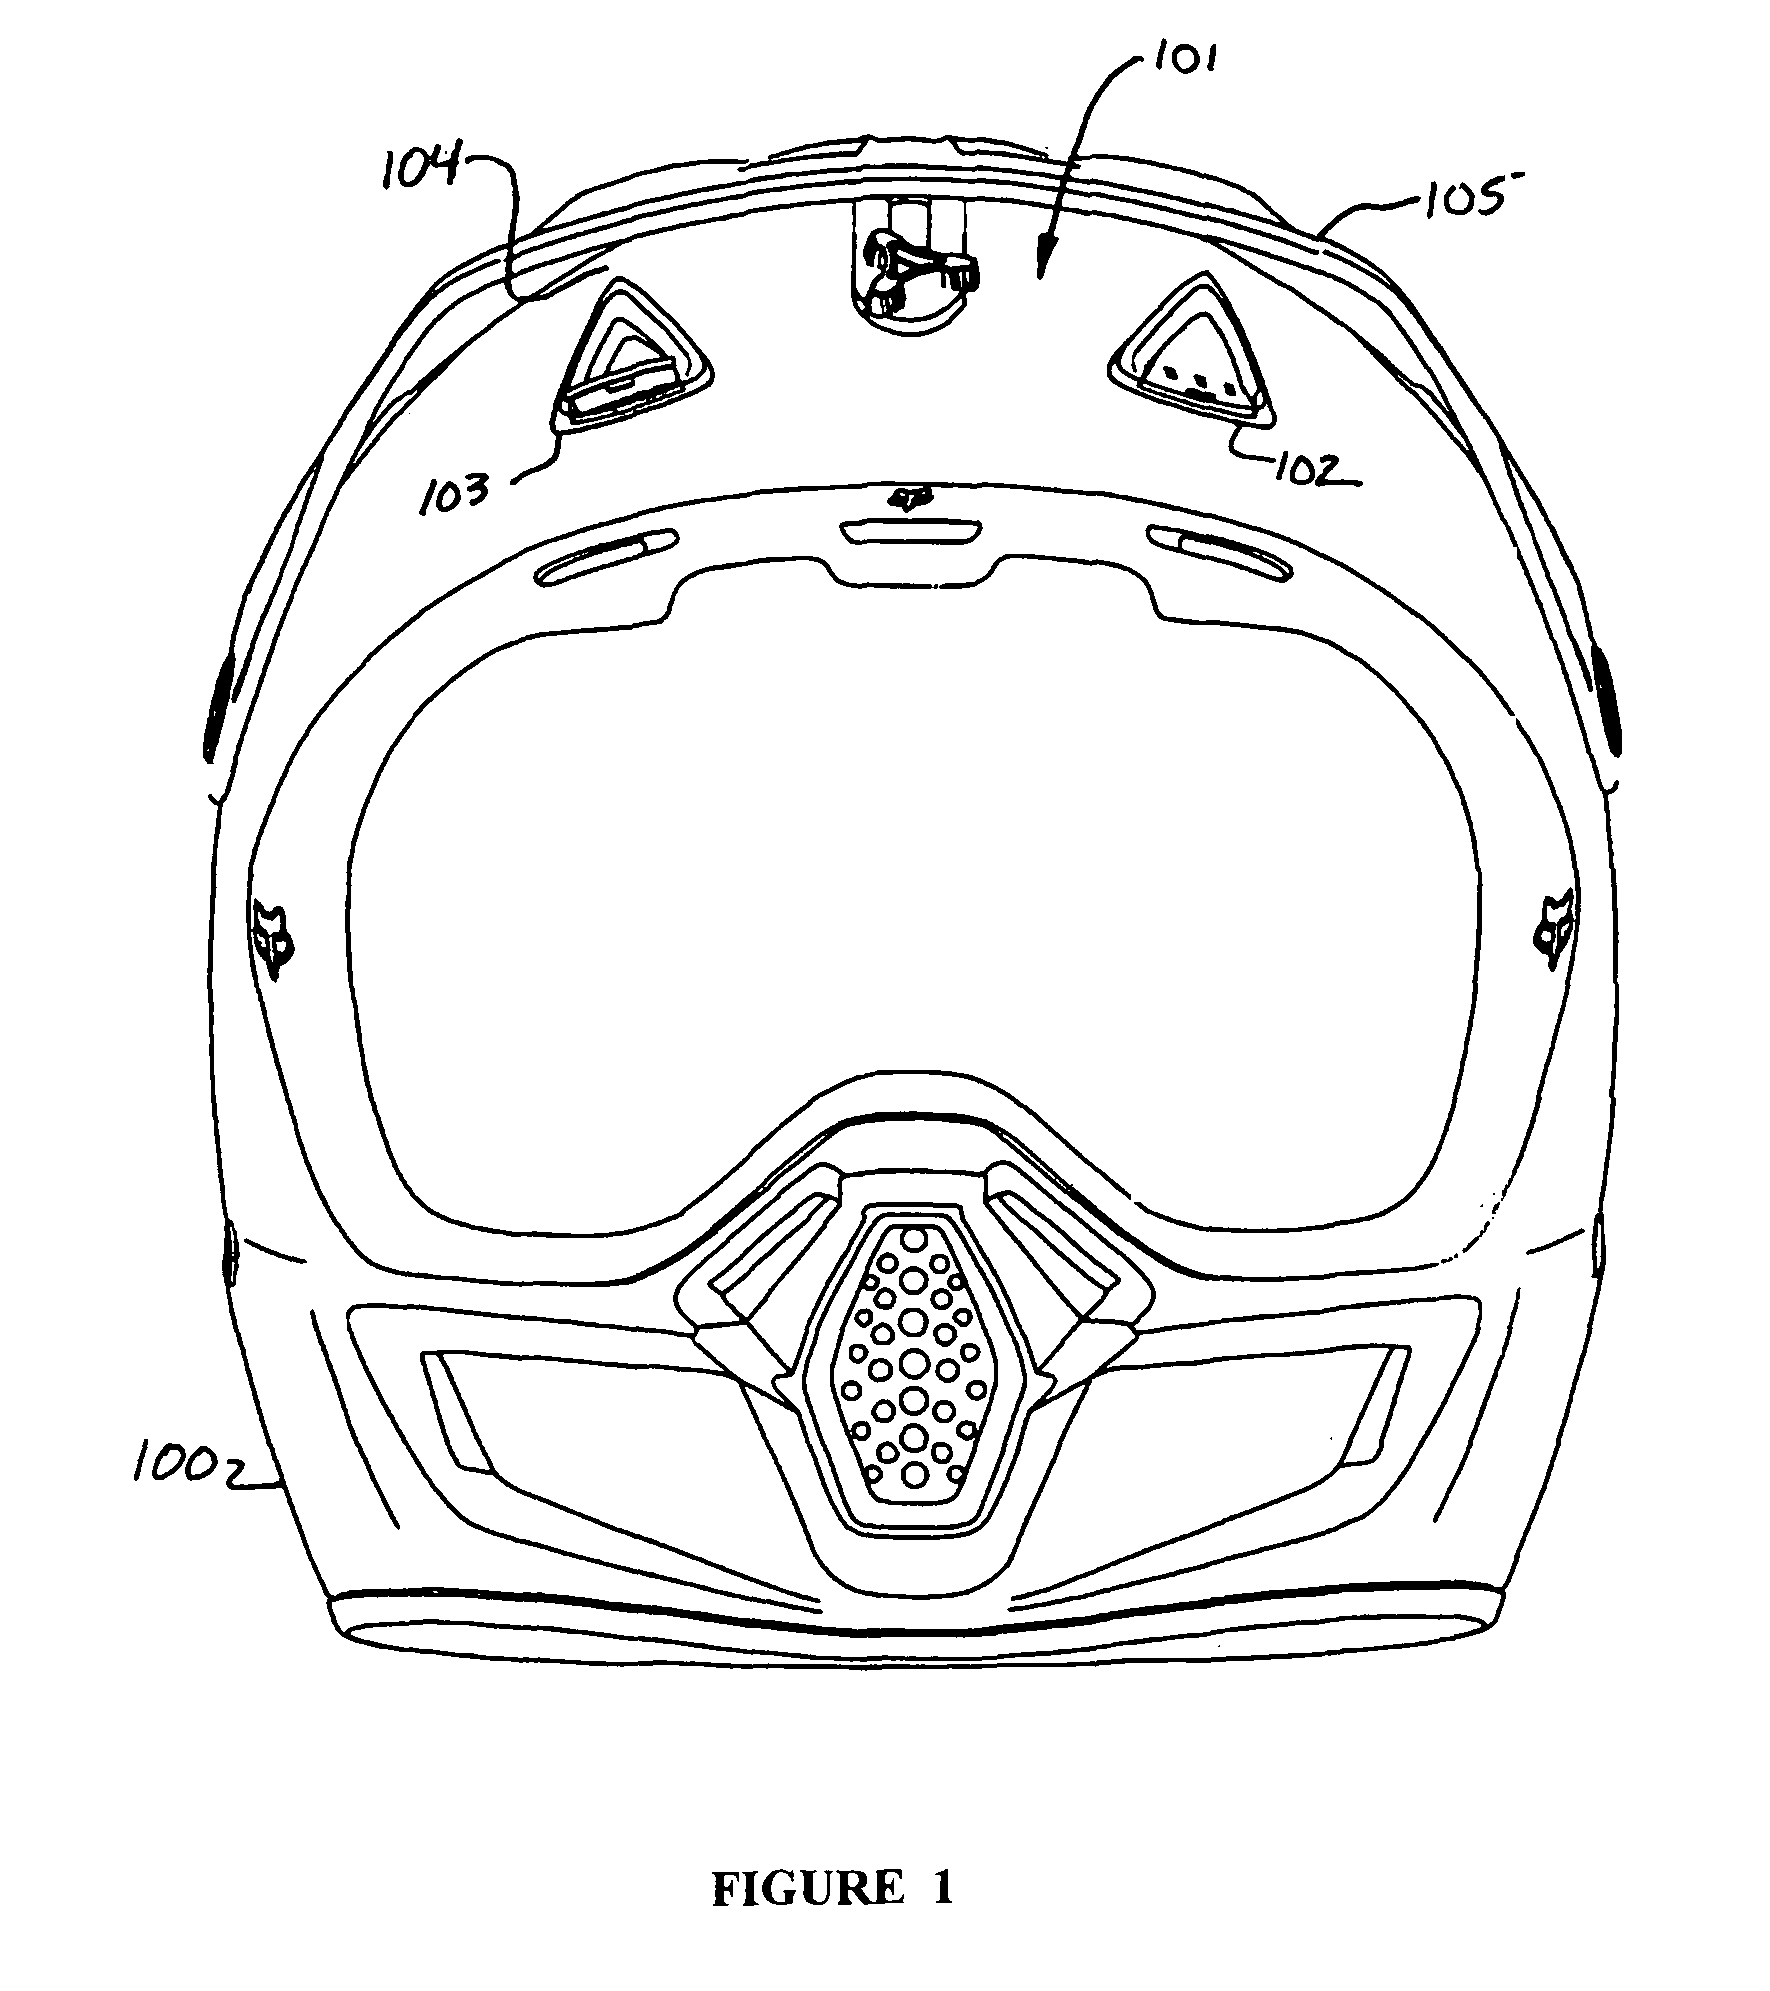 Low profile helmet vents and venting system